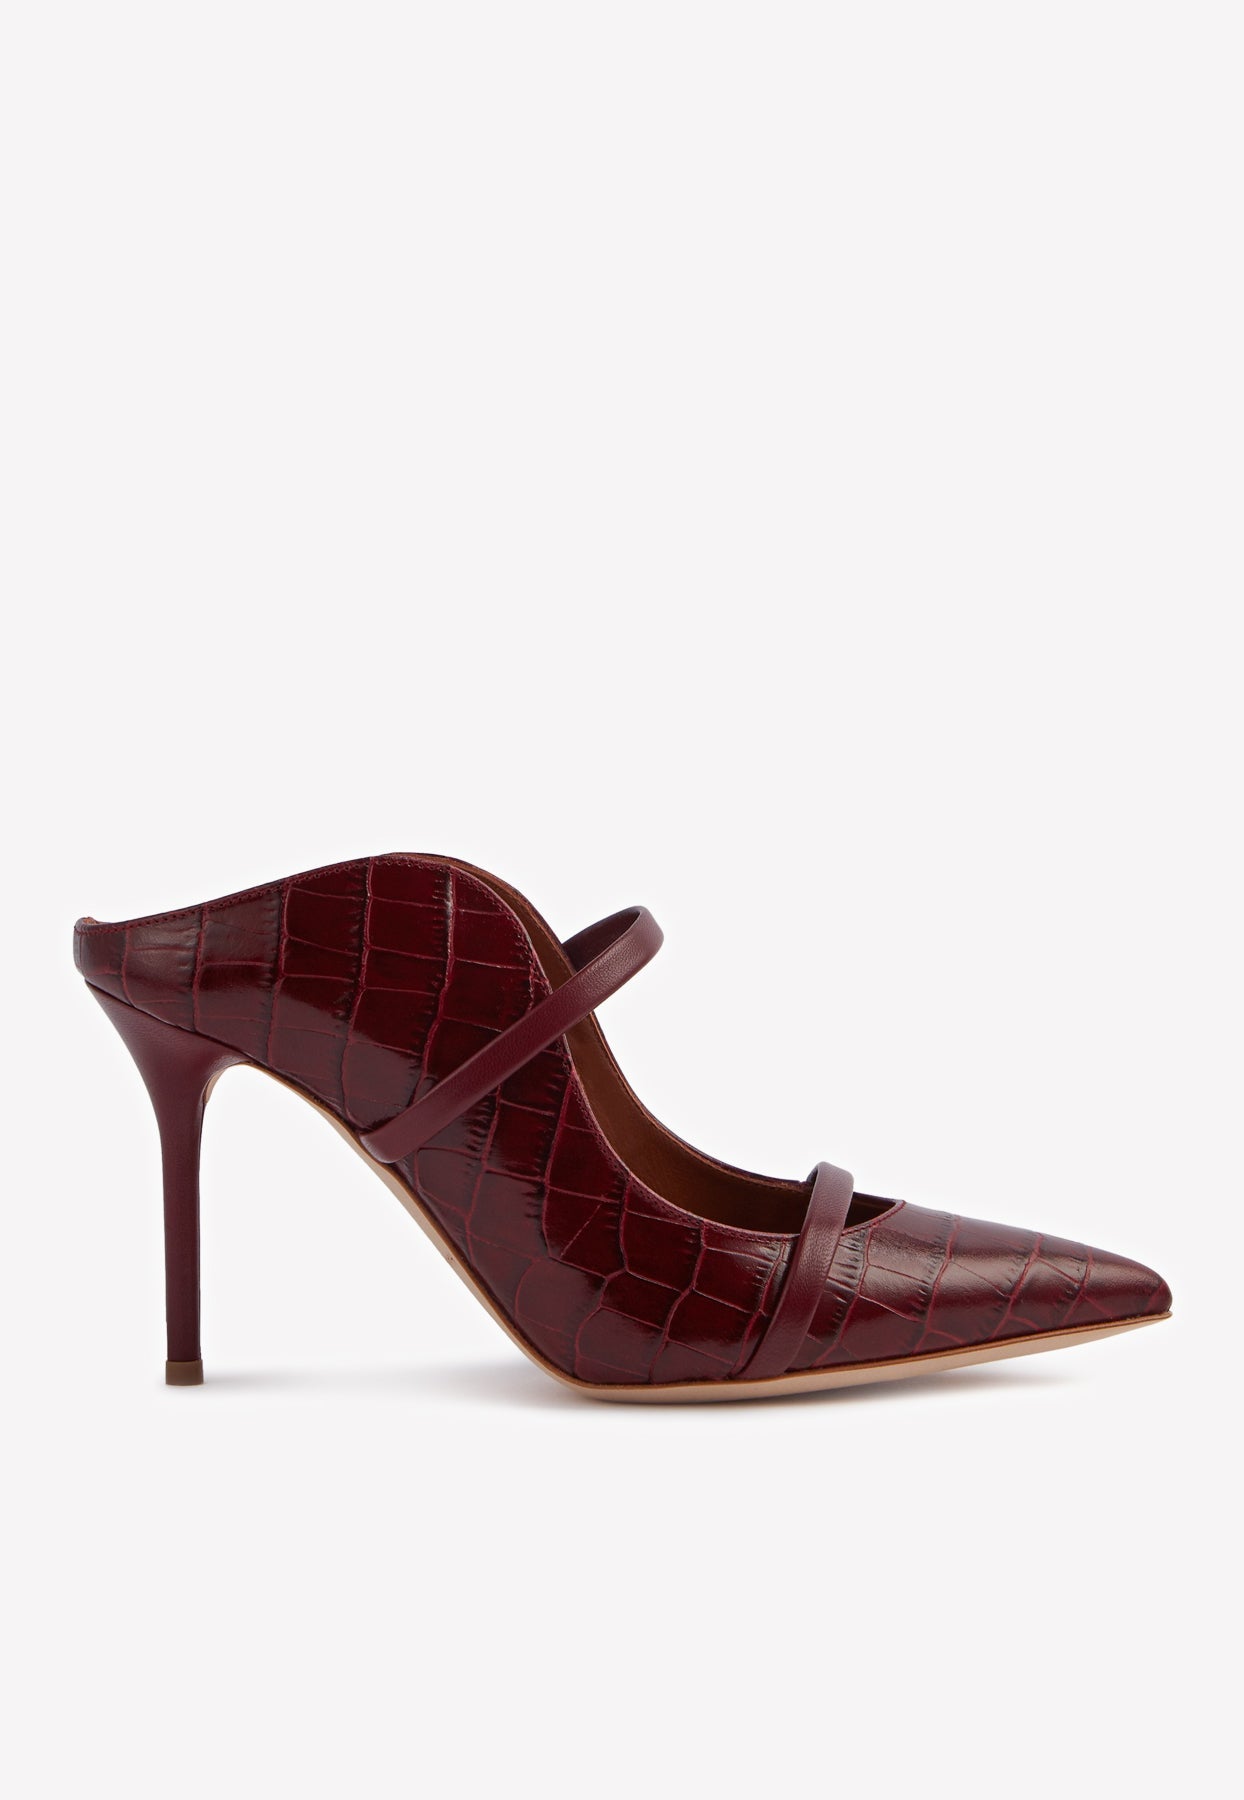 MALONE SOULIERS MAUREEN 85 MULES IN CROC-EMBOSSED LEATHER